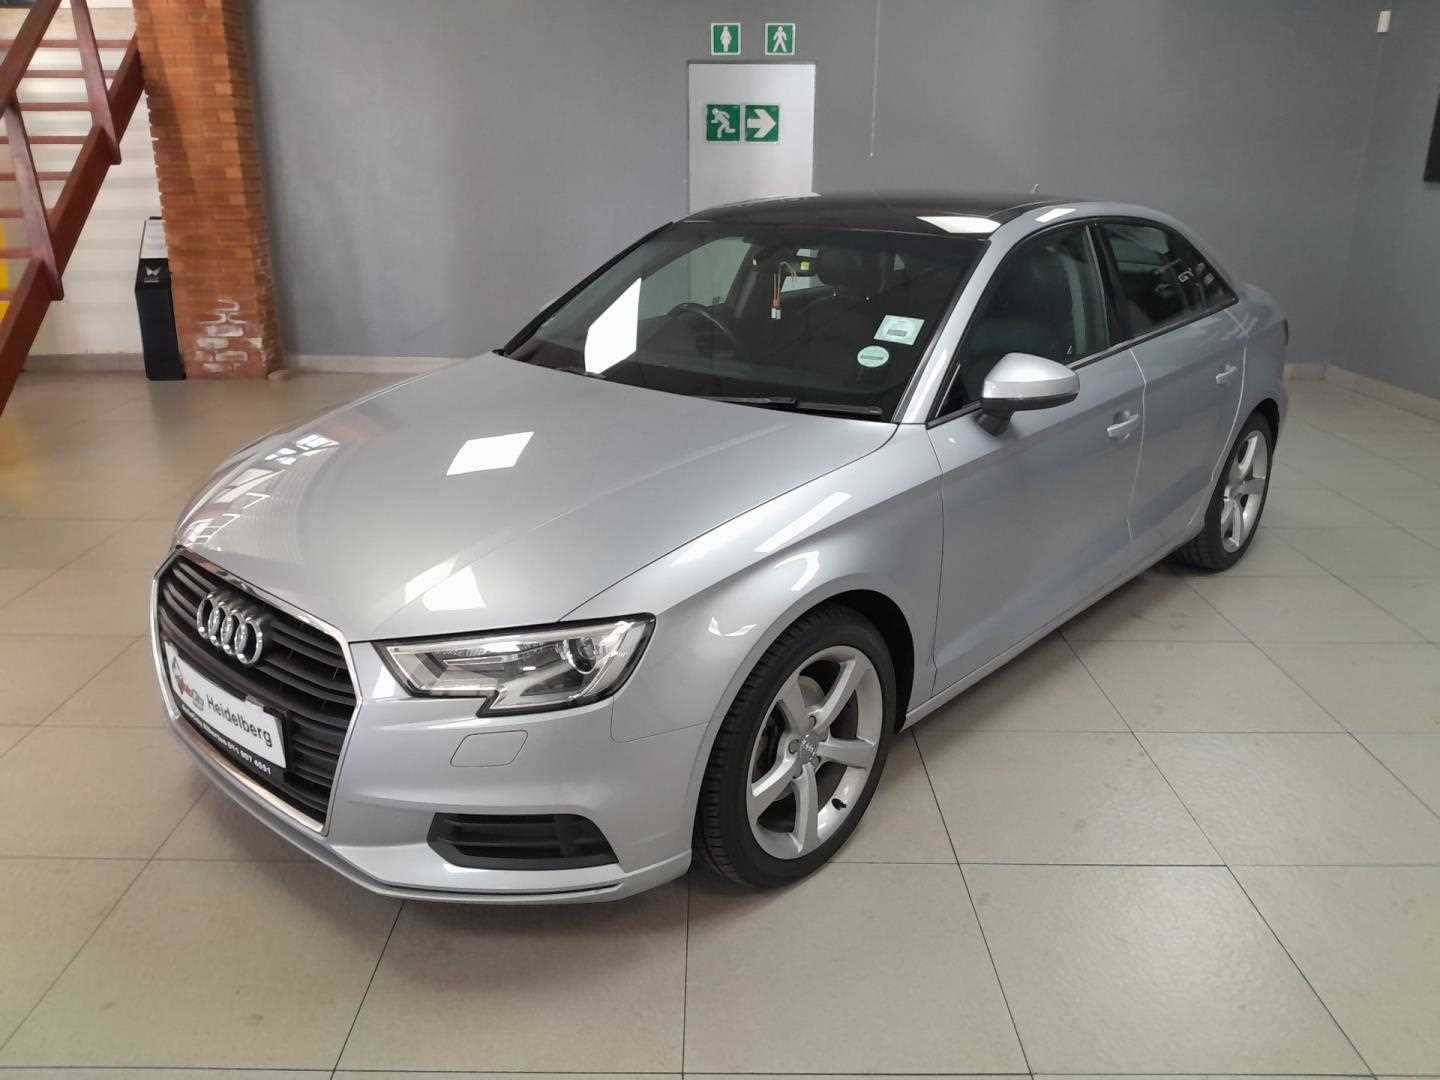 AUDI A3 2.0 TDI SE STRONIC for Sale in South Africa